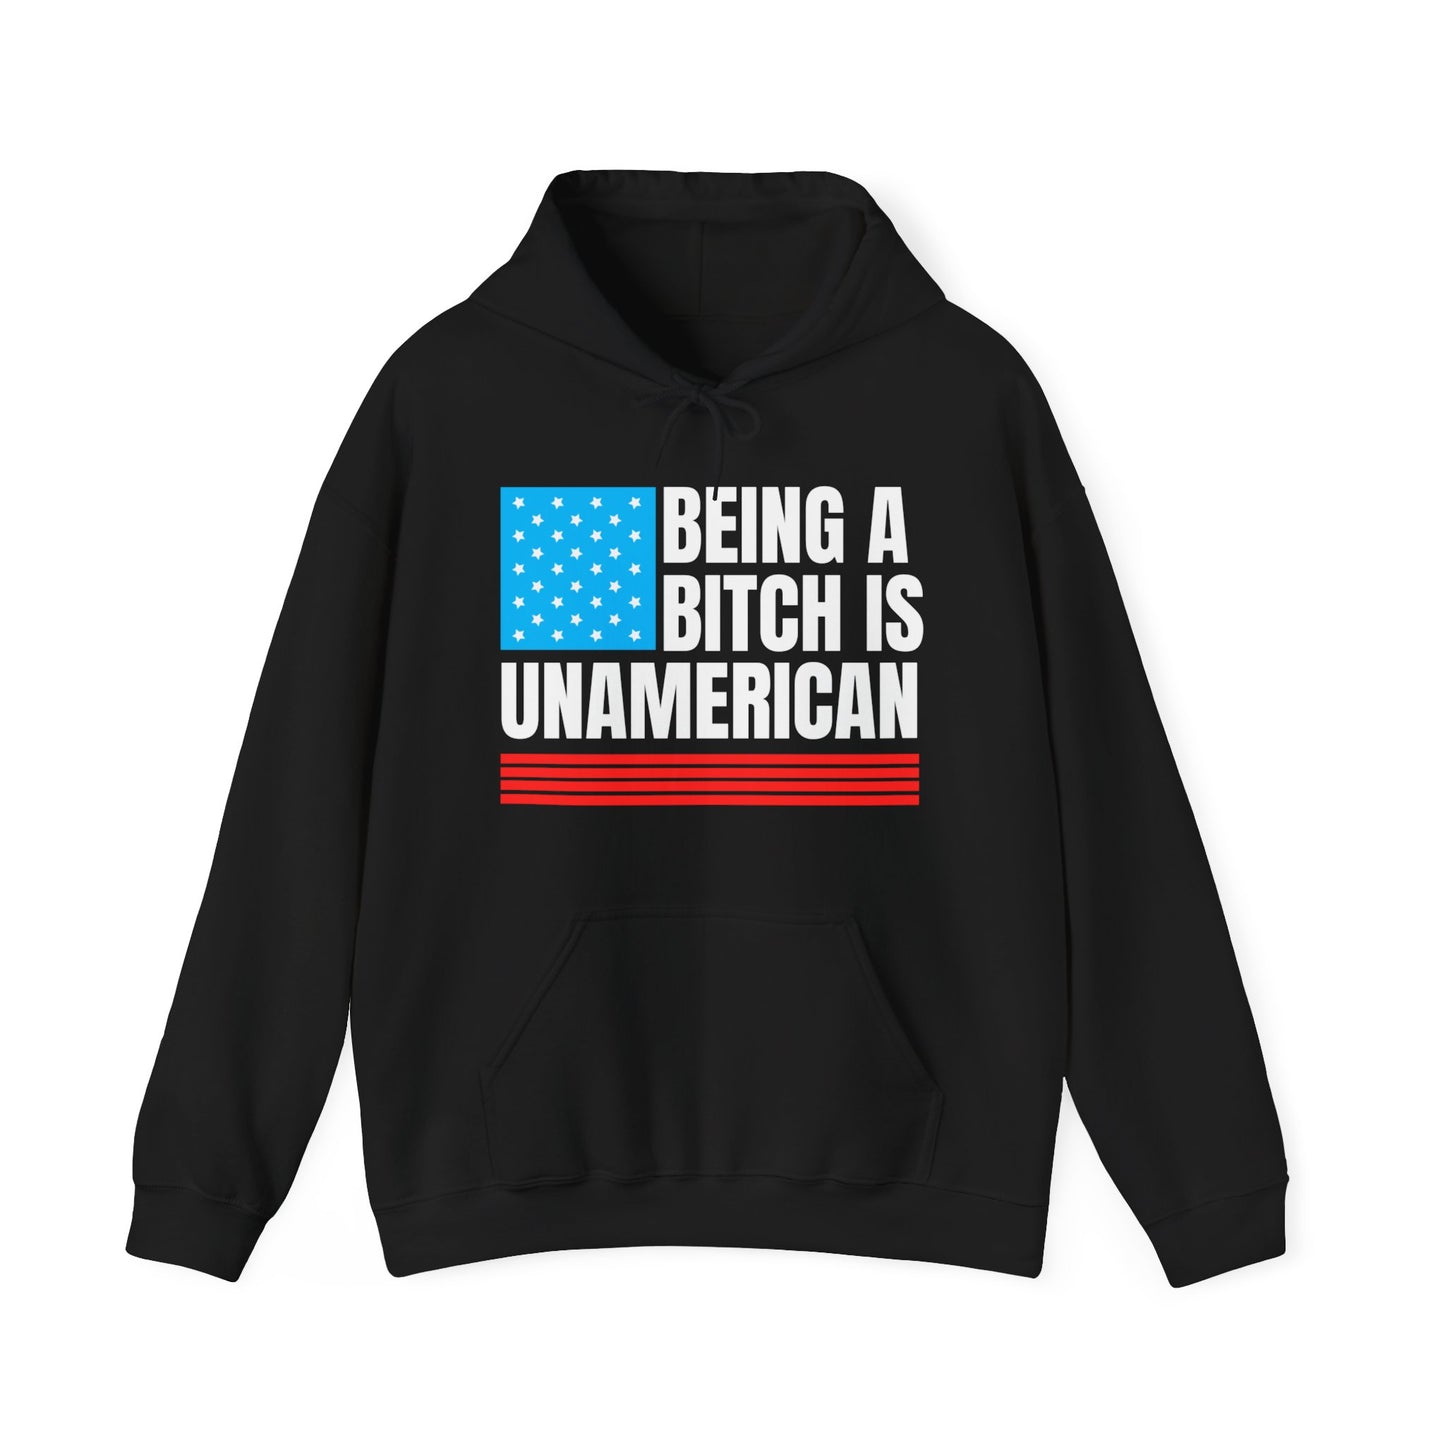 Being A Bitch Is Unamerican Hoodie